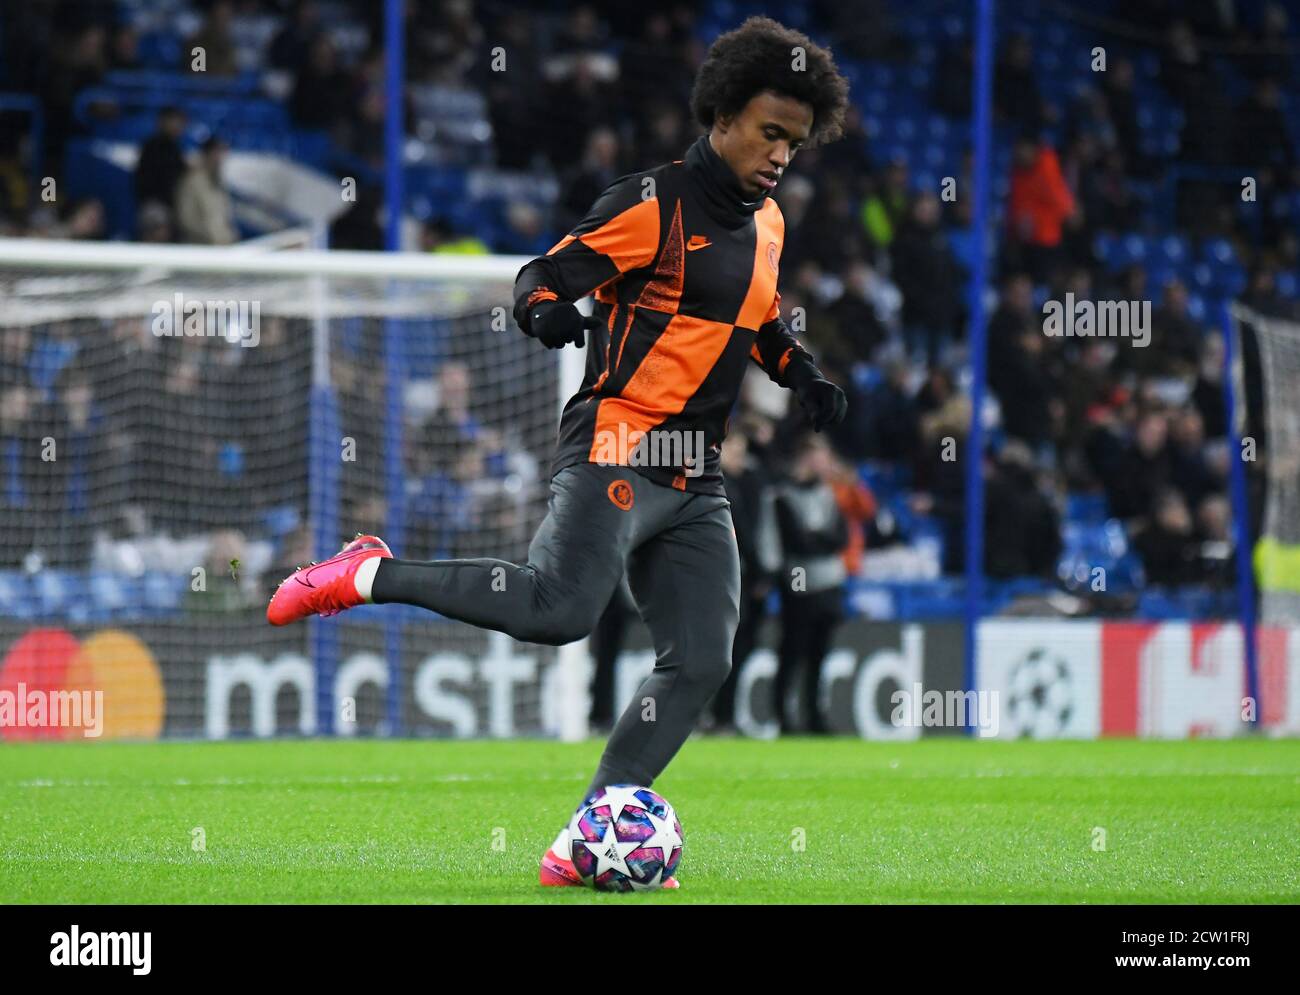 LONDON, ENGLAND - FEBRUARY 26, 2020: Willian Borges da Silva of Chelsea pictured during the 2019/20 UEFA Champions League Round of 16 game between Chelsea FC and Bayern Munich at Stamford Bridge. Stock Photo